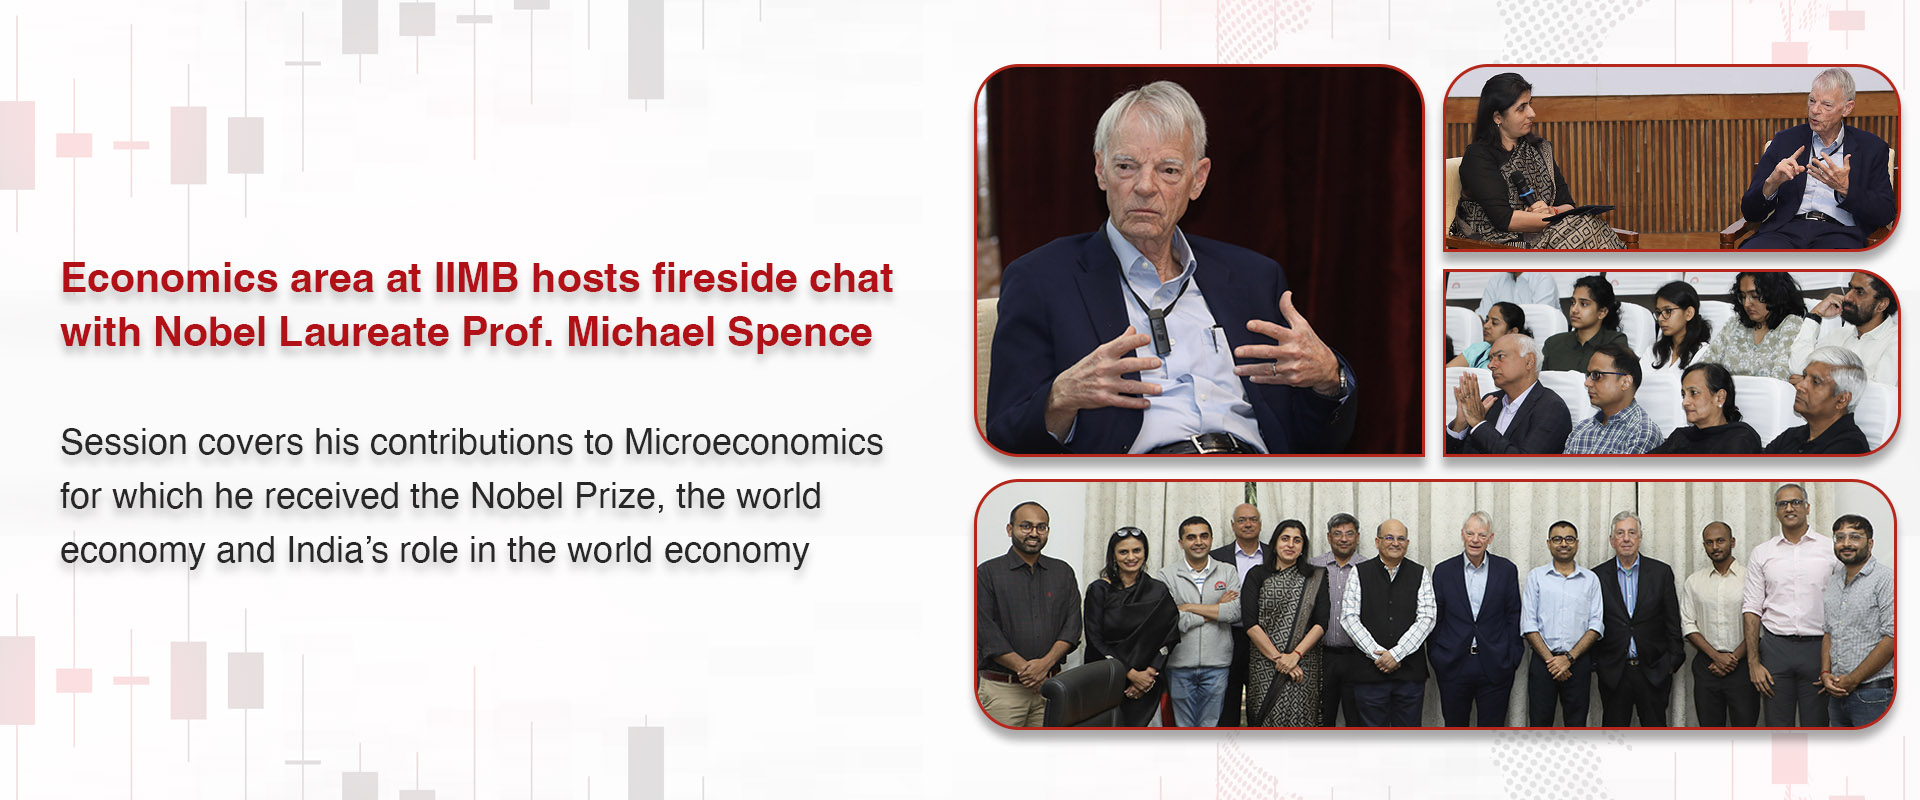 Economics area to host fireside chat on 15th February with Nobel Laureate Prof. Michael Spence